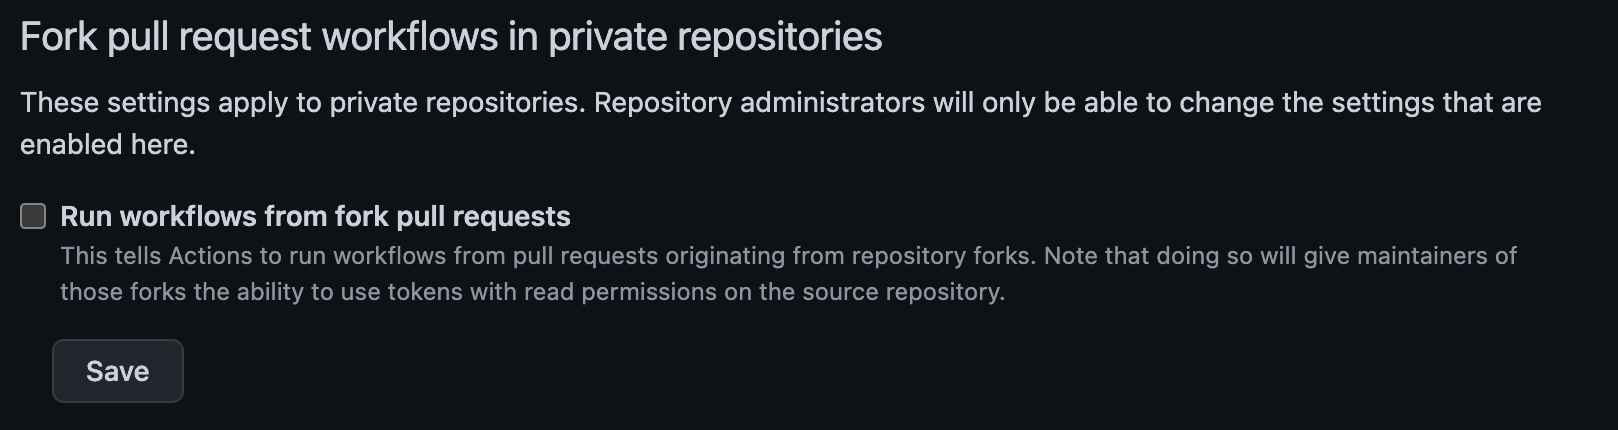 Fork pull request workflows in private repositories